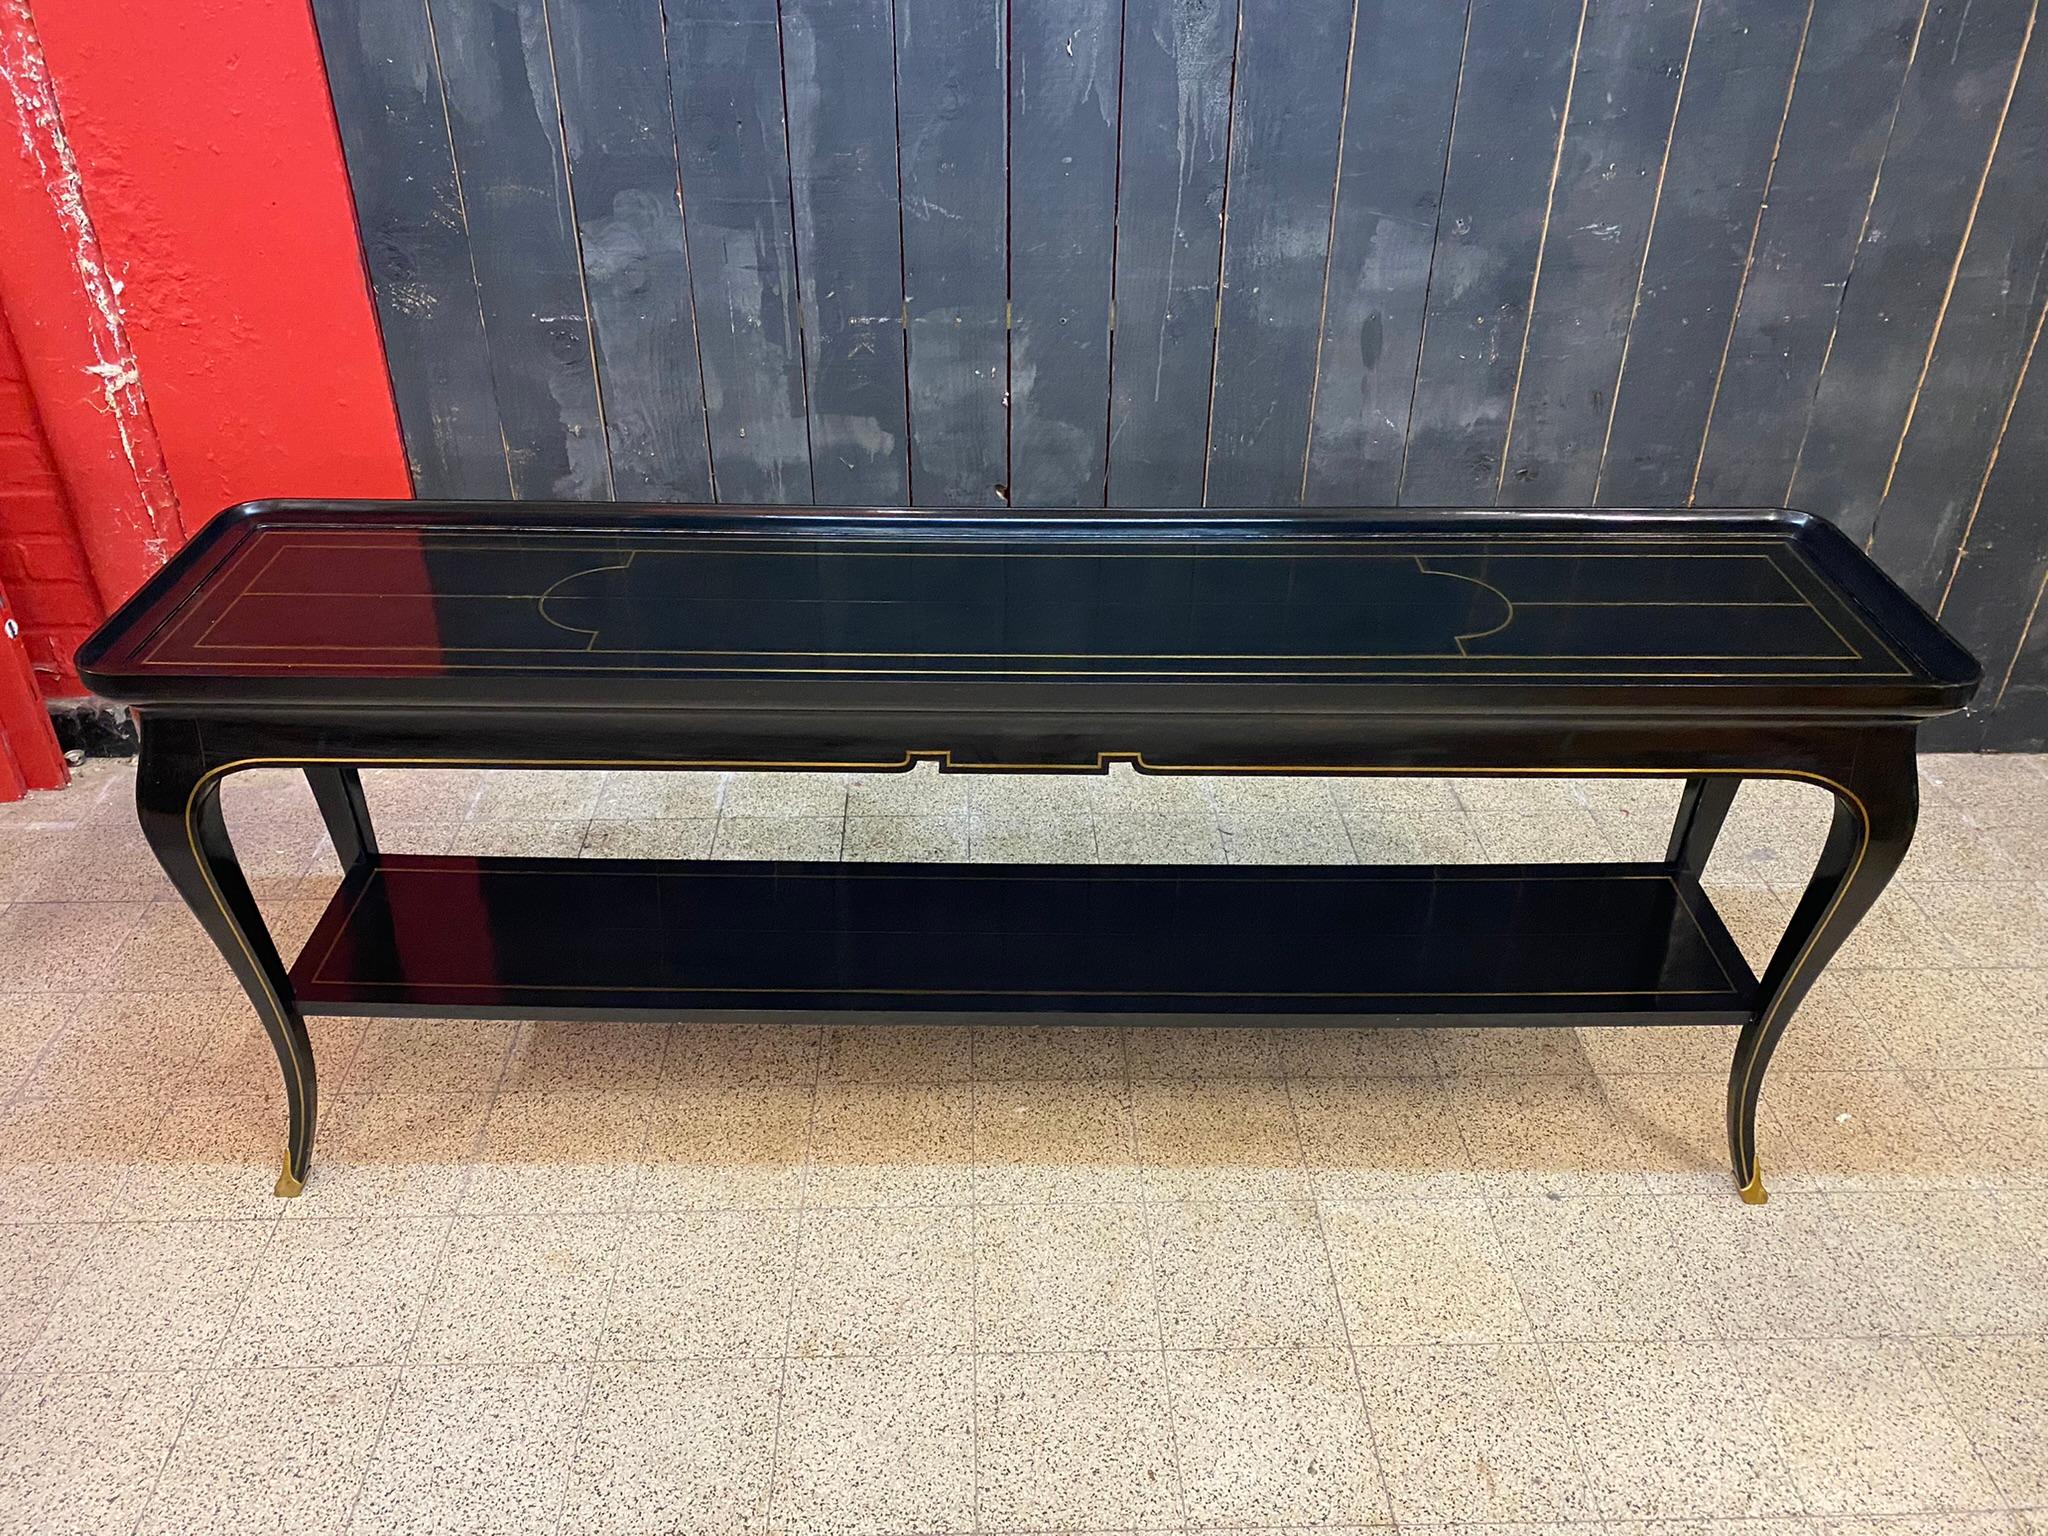 Maison Jansen, Exceptional Large Neo Classic Console Table, circa 1950/1960 In Good Condition For Sale In Saint-Ouen, FR